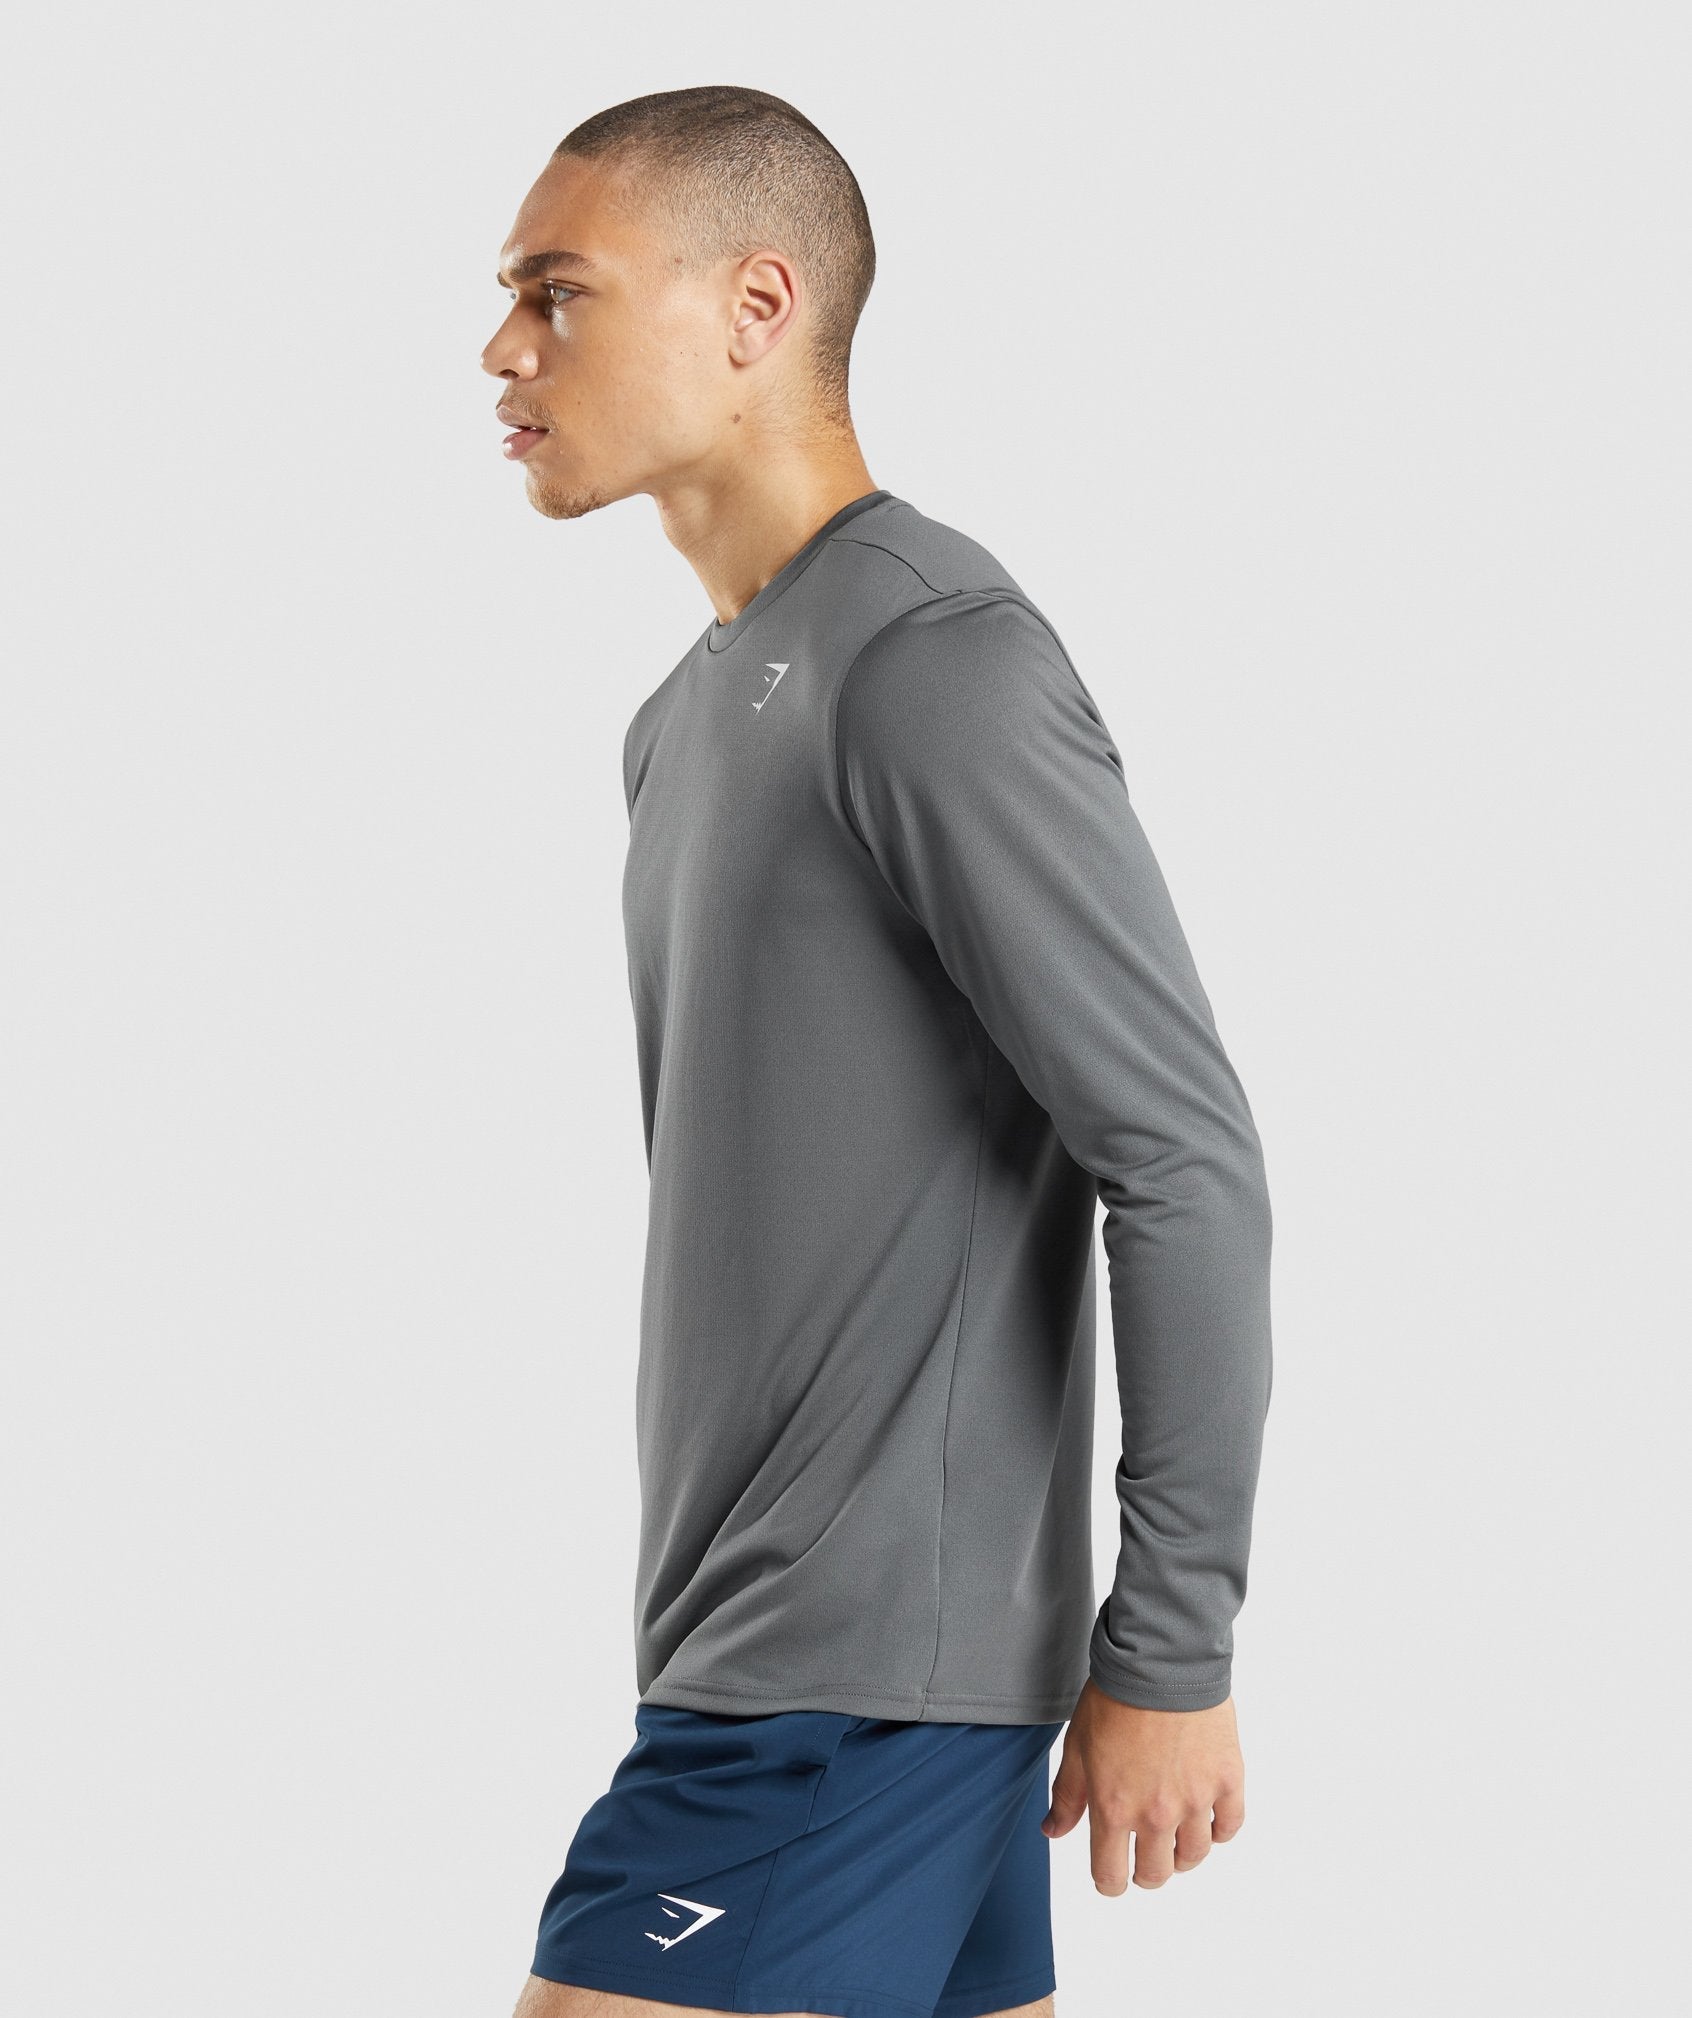 Arrival Long Sleeve T-Shirt in Charcoal - view 3